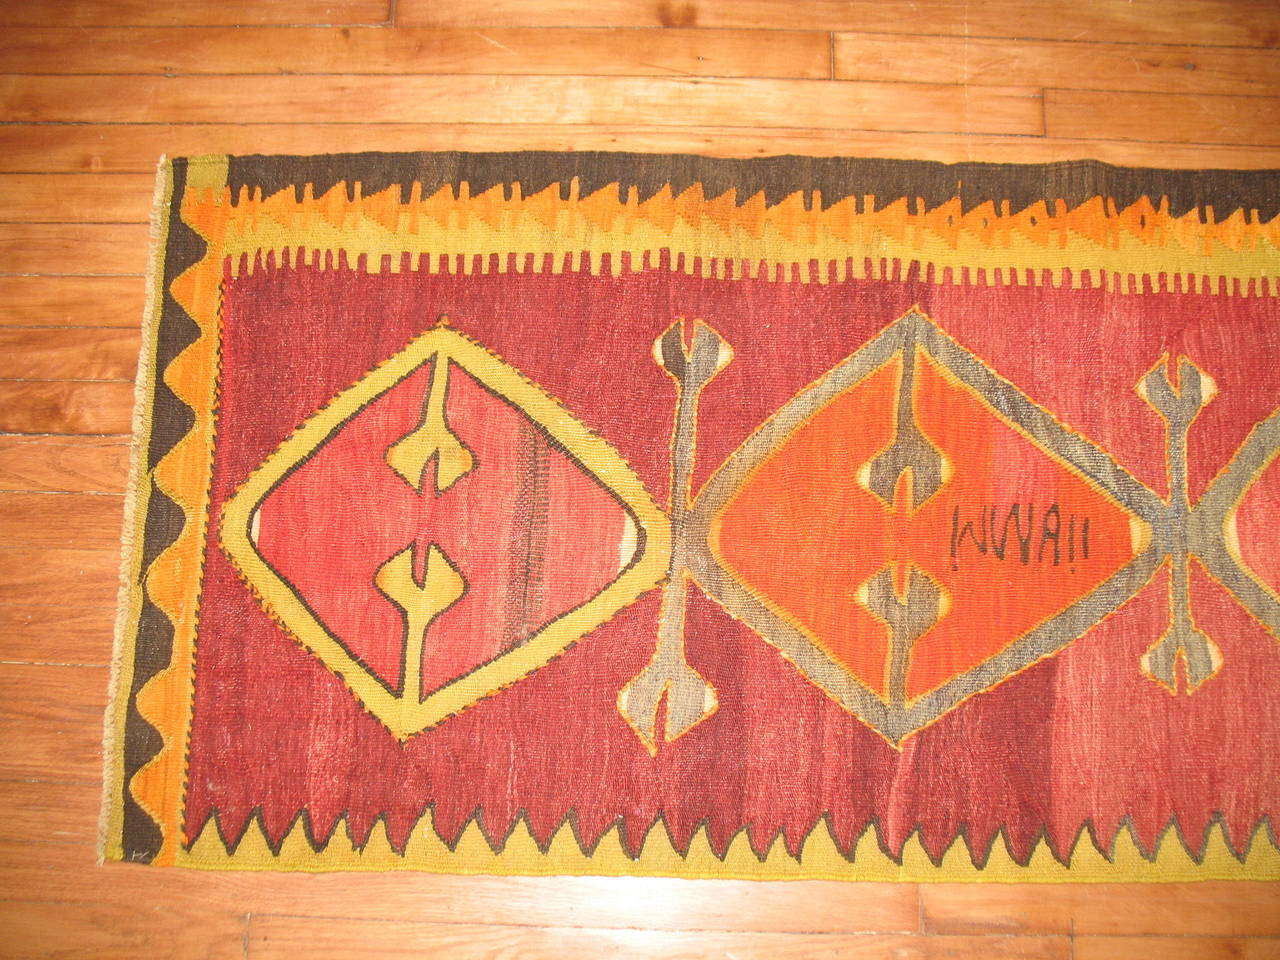 2 vintage turkish kilim runners that can coordinate with one another. Measuring 2'5'' x 12'7'' & 2'8'' x 12'3'' respectively.